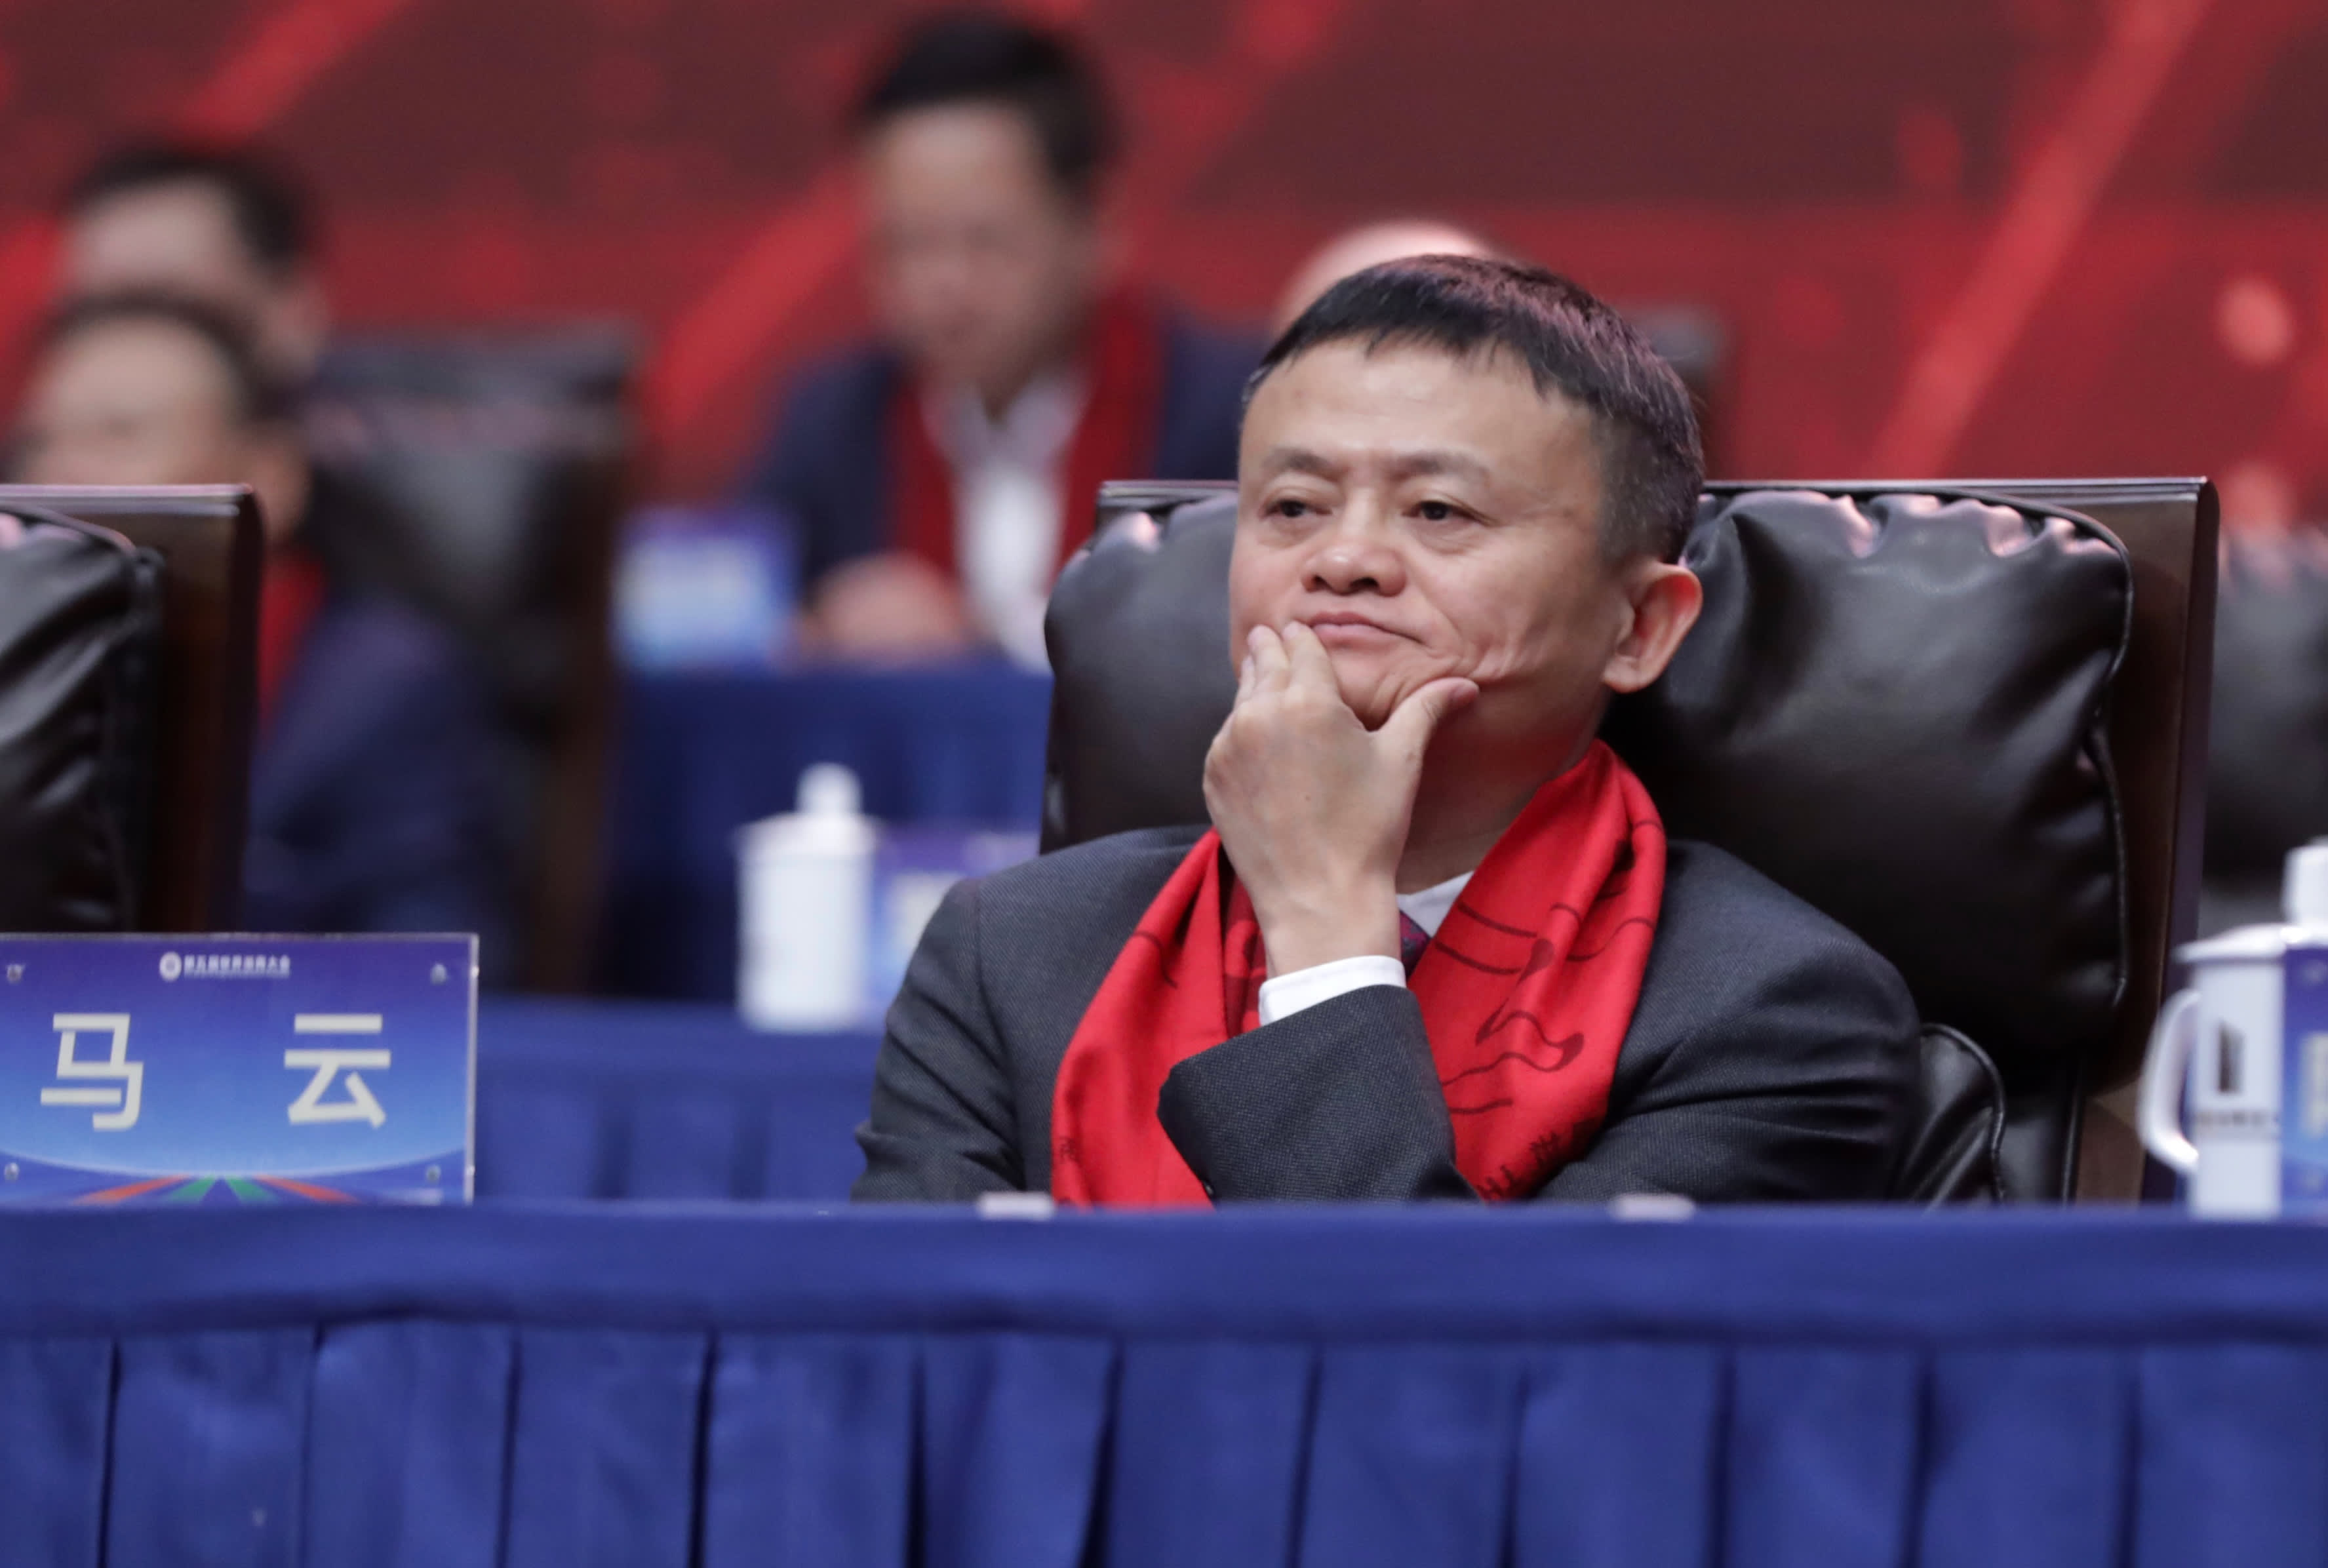 Jack Ma’s tension with Beijing casts shadows on Alibaba’s future